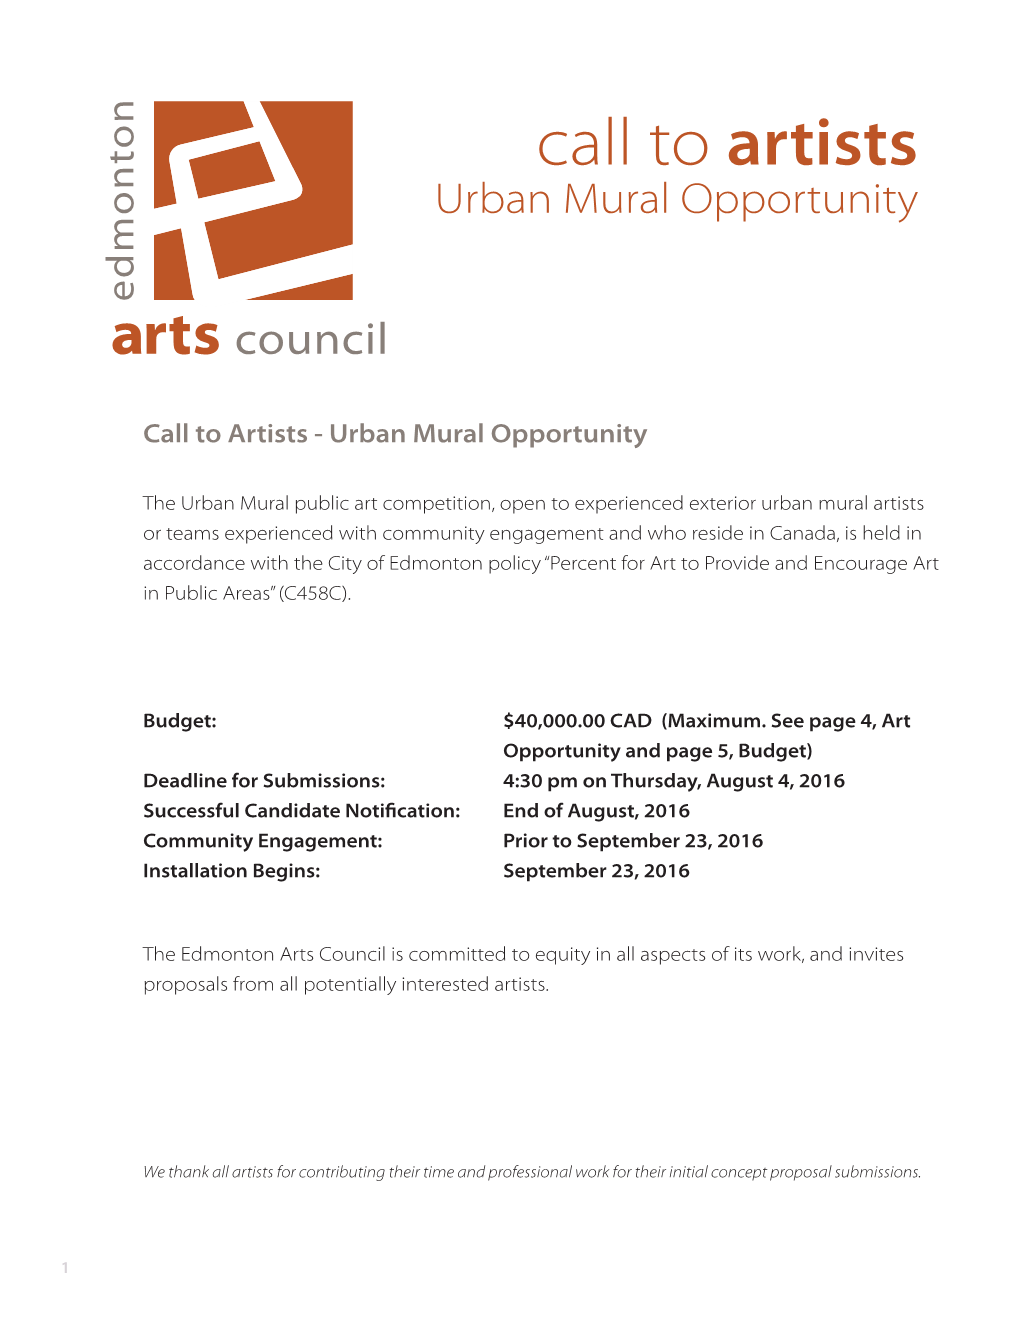 Call to Artists: Urban Mural Opportunity